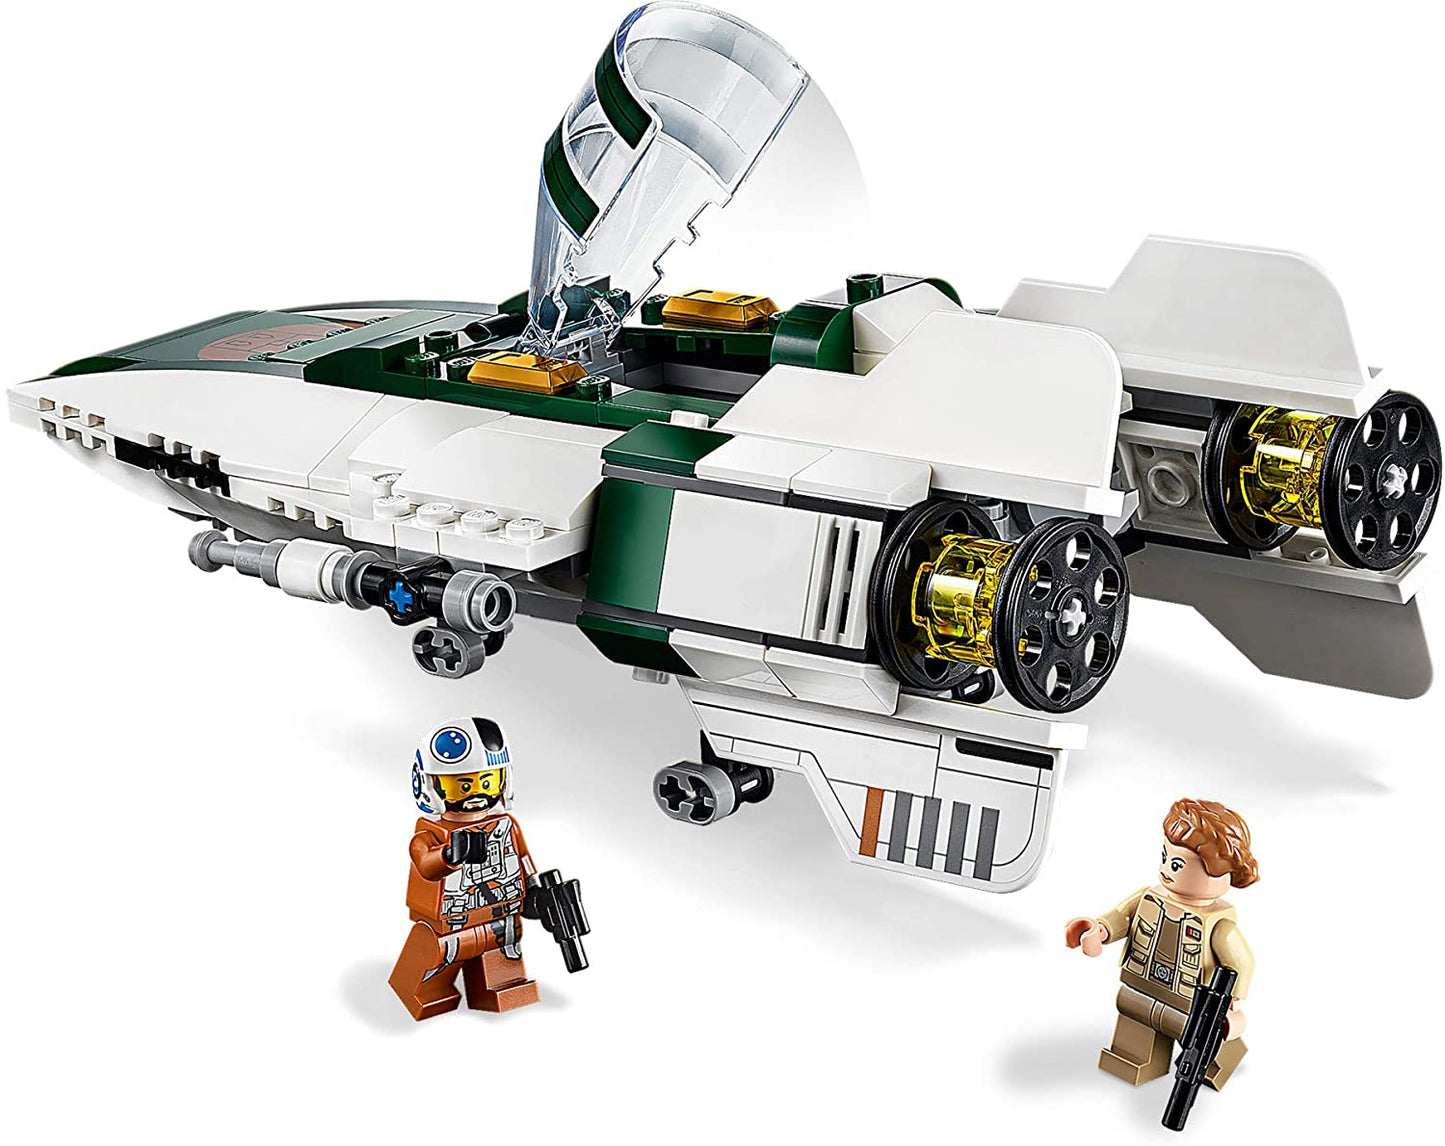 LEGO Star Wars - Resistance A Wing Starfighter 75248